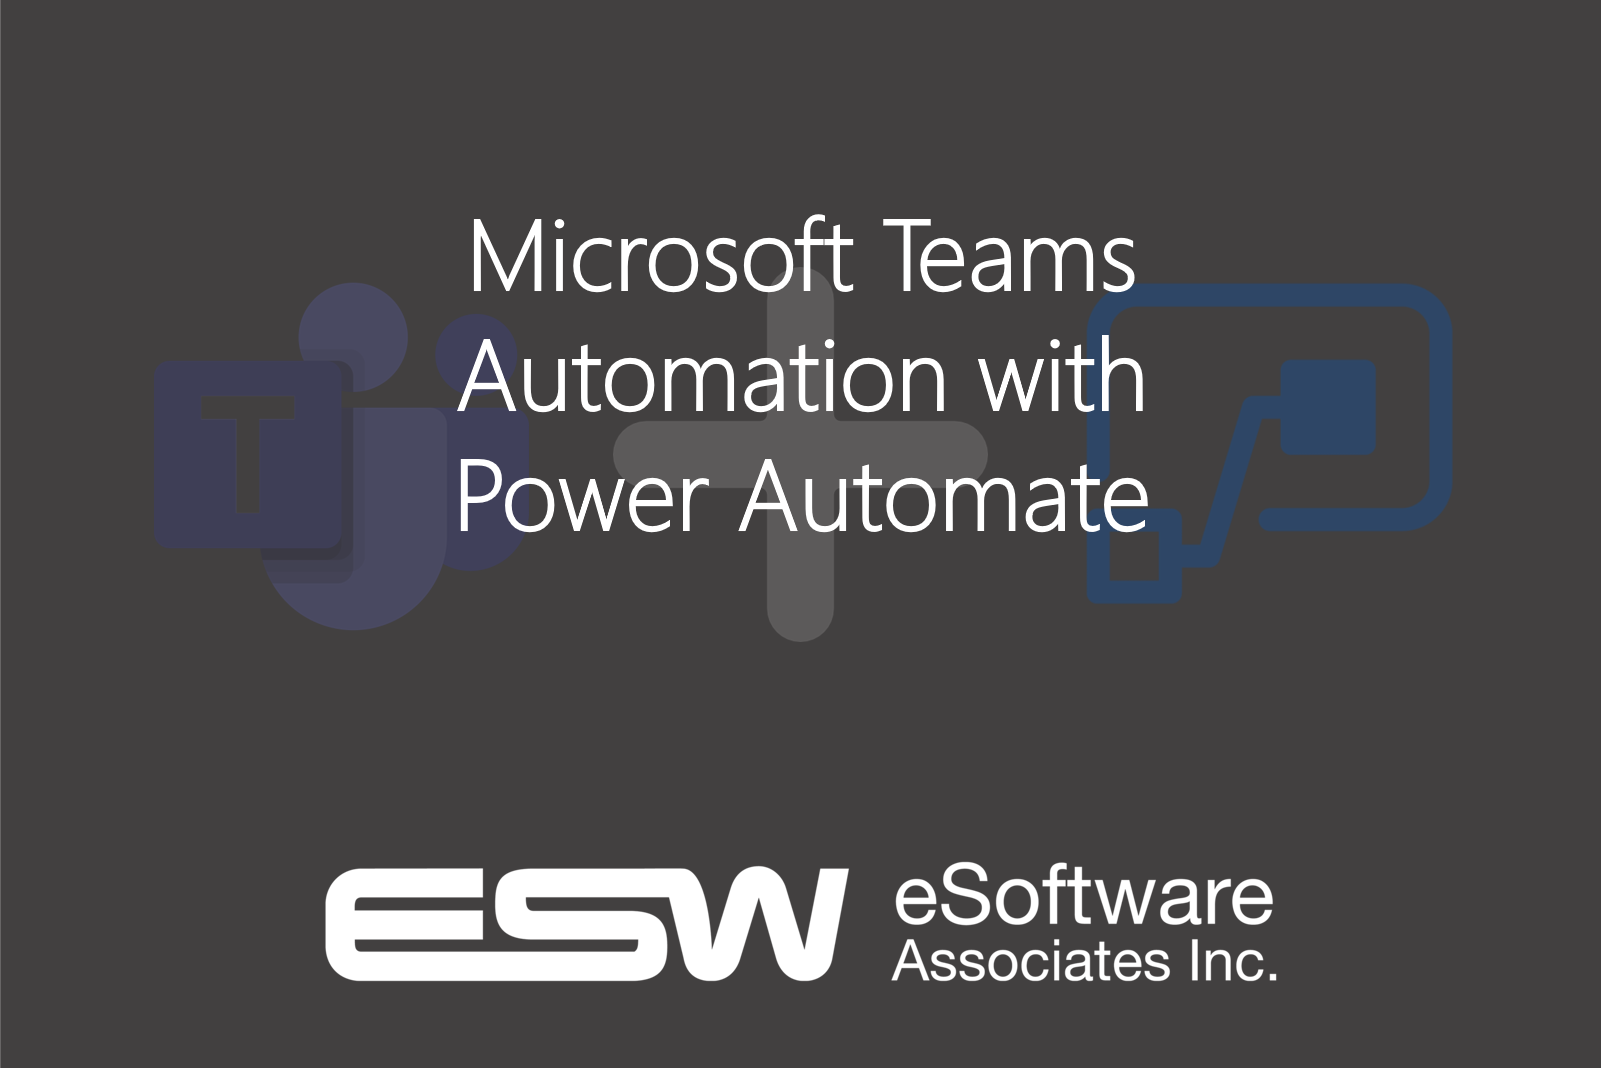 Learn about Microsoft Teams Automation with Power Automate.